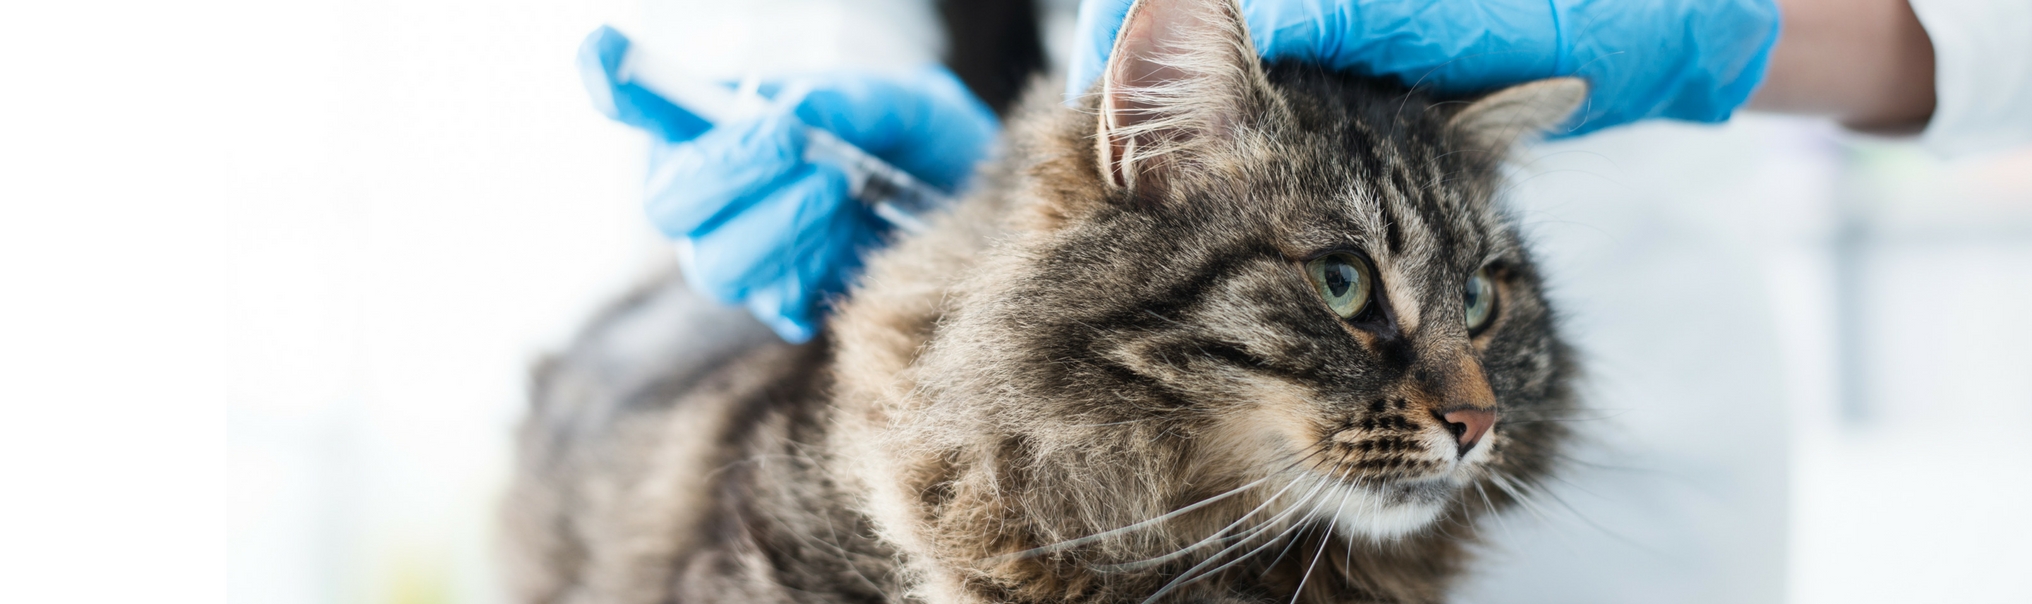 Vaccinations for Kittens and Cats - Signal Hill Animal Clinic